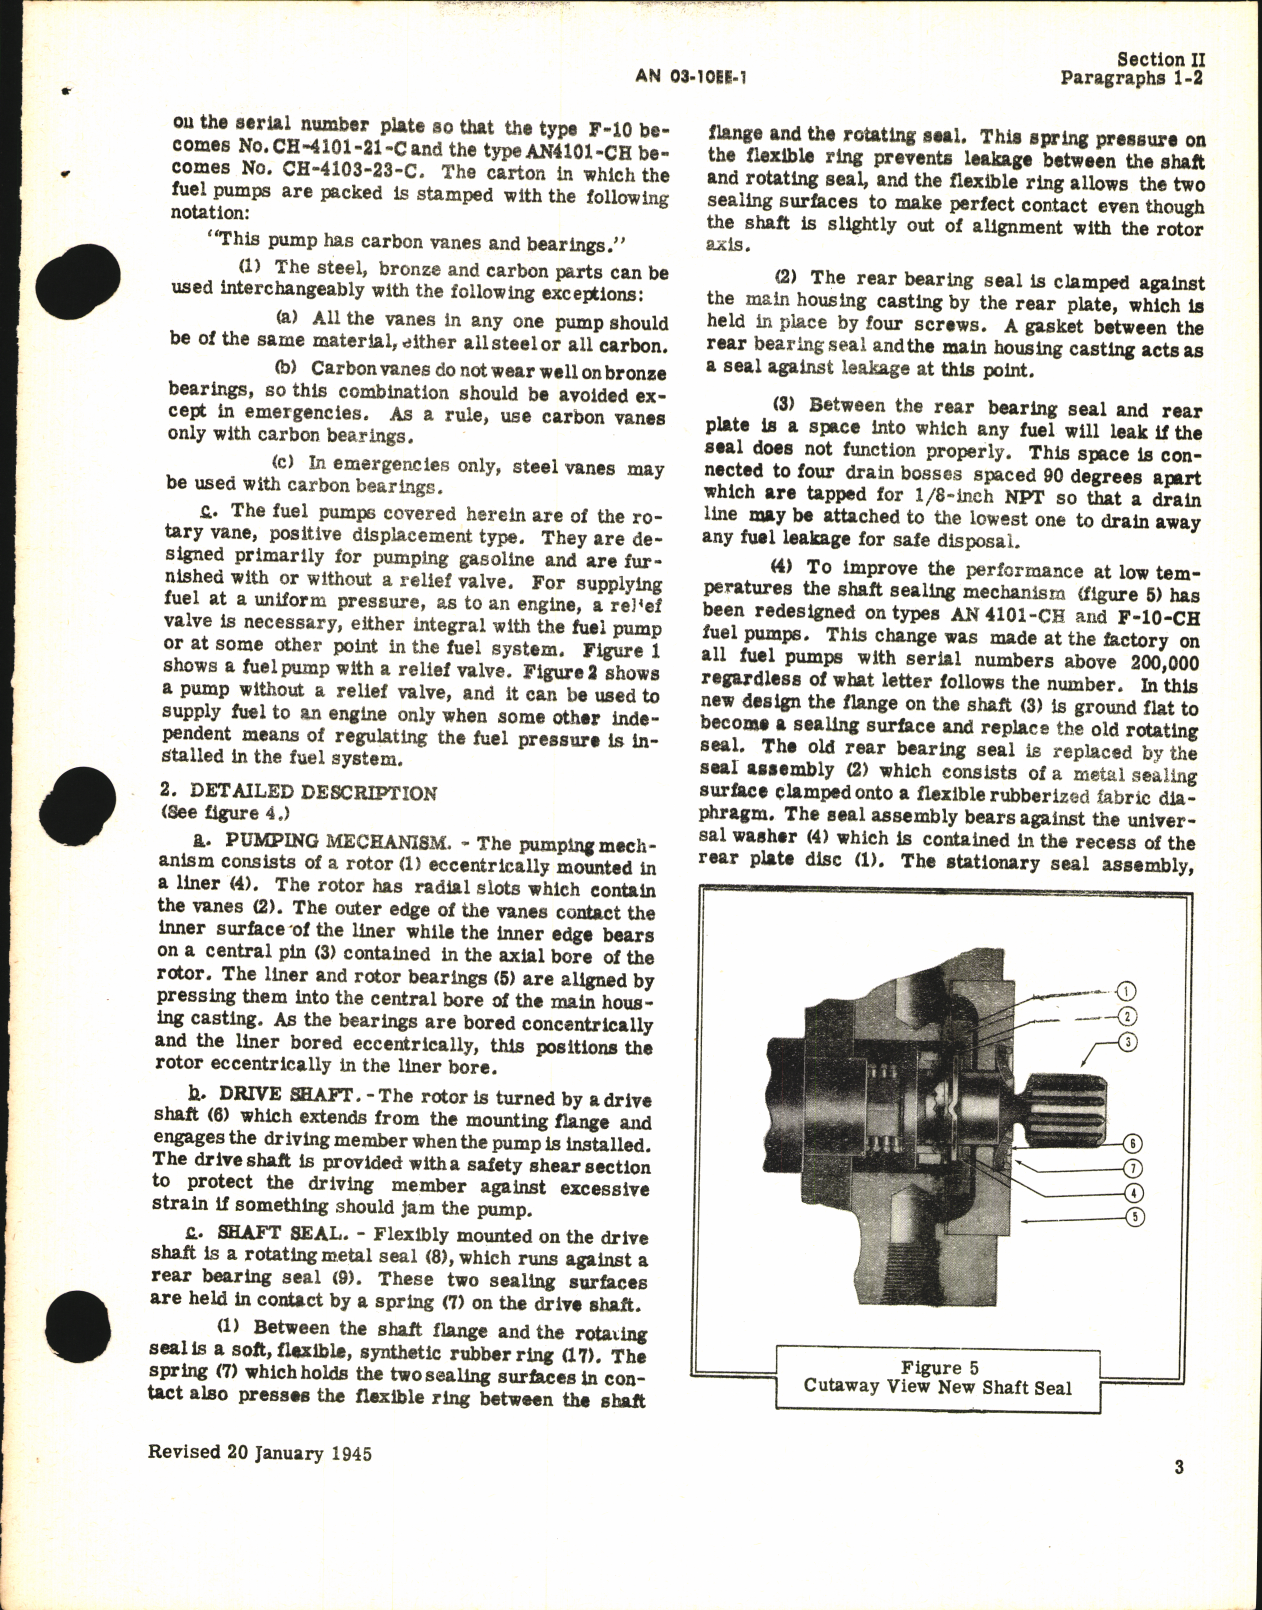 Sample page 7 from AirCorps Library document: Operation, Service, & Overhaul Instructions with Parts Catalog for Engine-Driven Fuel Pumps